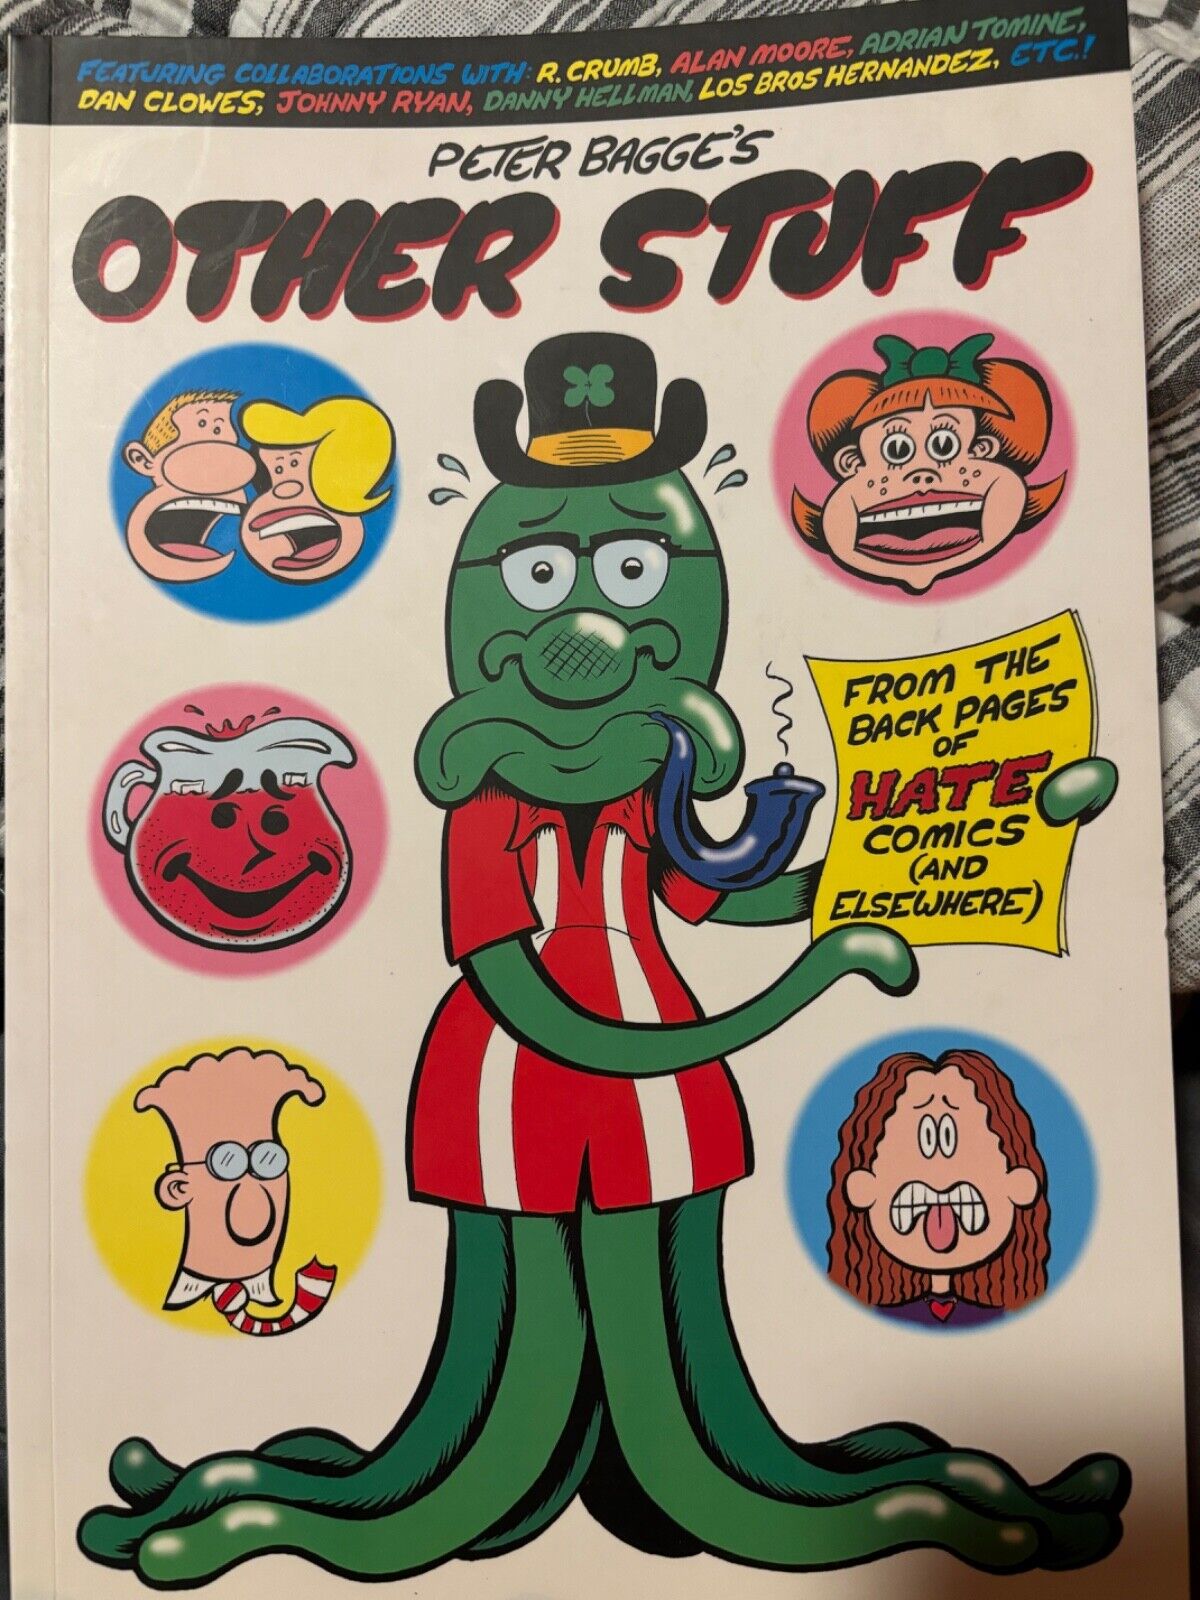 OTHER STUFF by Peter Bagge - Paperback Graphic Novel